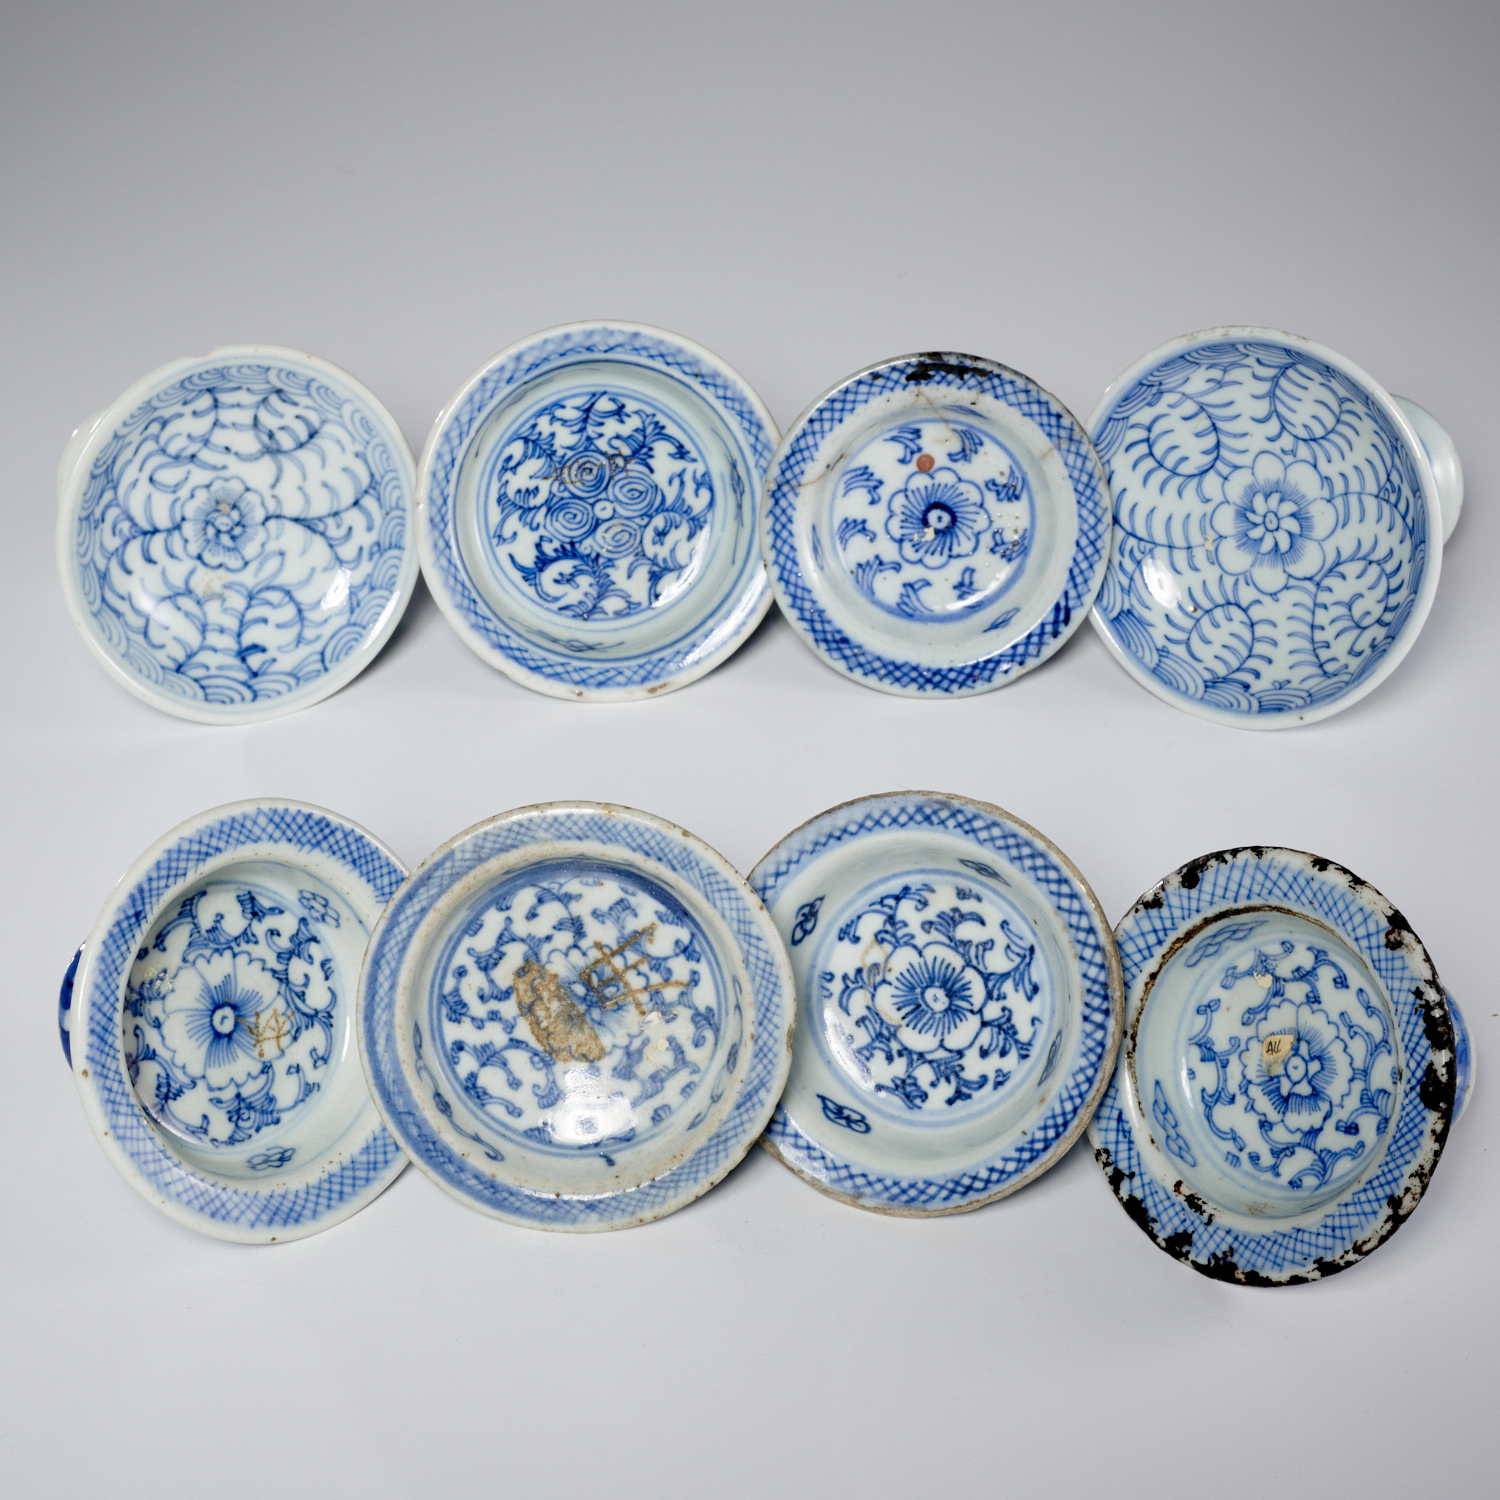  8 CHINESE BLUE AND WHITE PORCELAIN 360a92